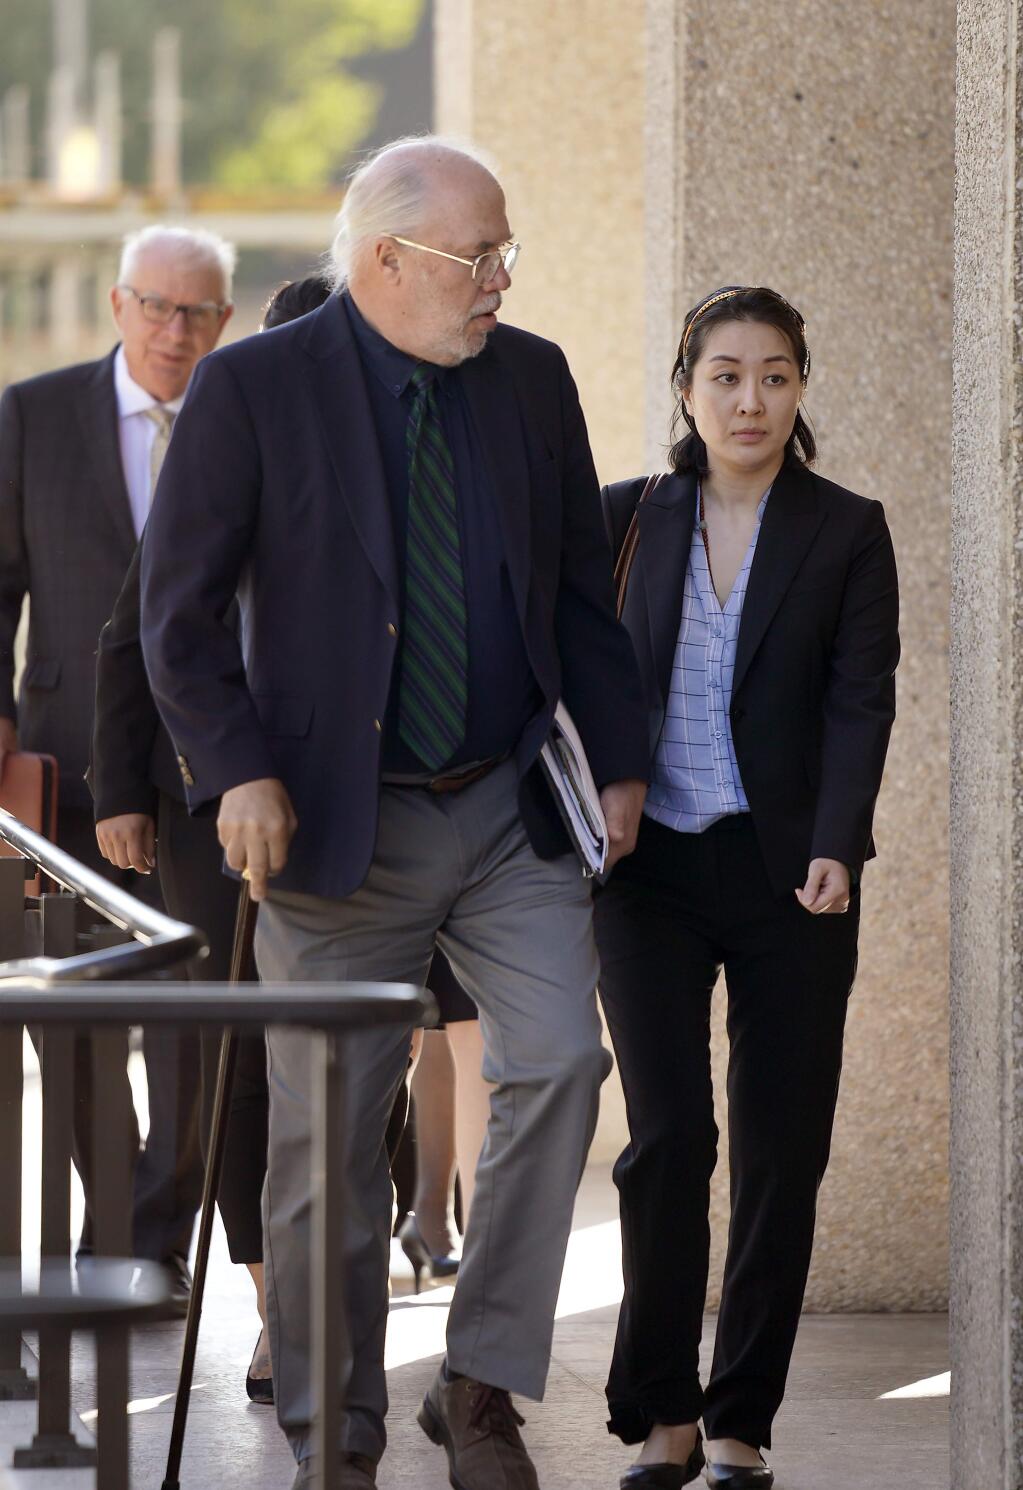 Tiffany Li, right, and her attorney Geoff Carr, left, arrive at the courthouse Thursday, Sept. 12, 2019, in Redwood City, Calif. The trial of Li, a Chinese real estate scion who posted a $35 million bail after being charged with orchestrating the 2016 murder of her children's father, is set to start Thursday.(AP Photo/Tony Avelar)